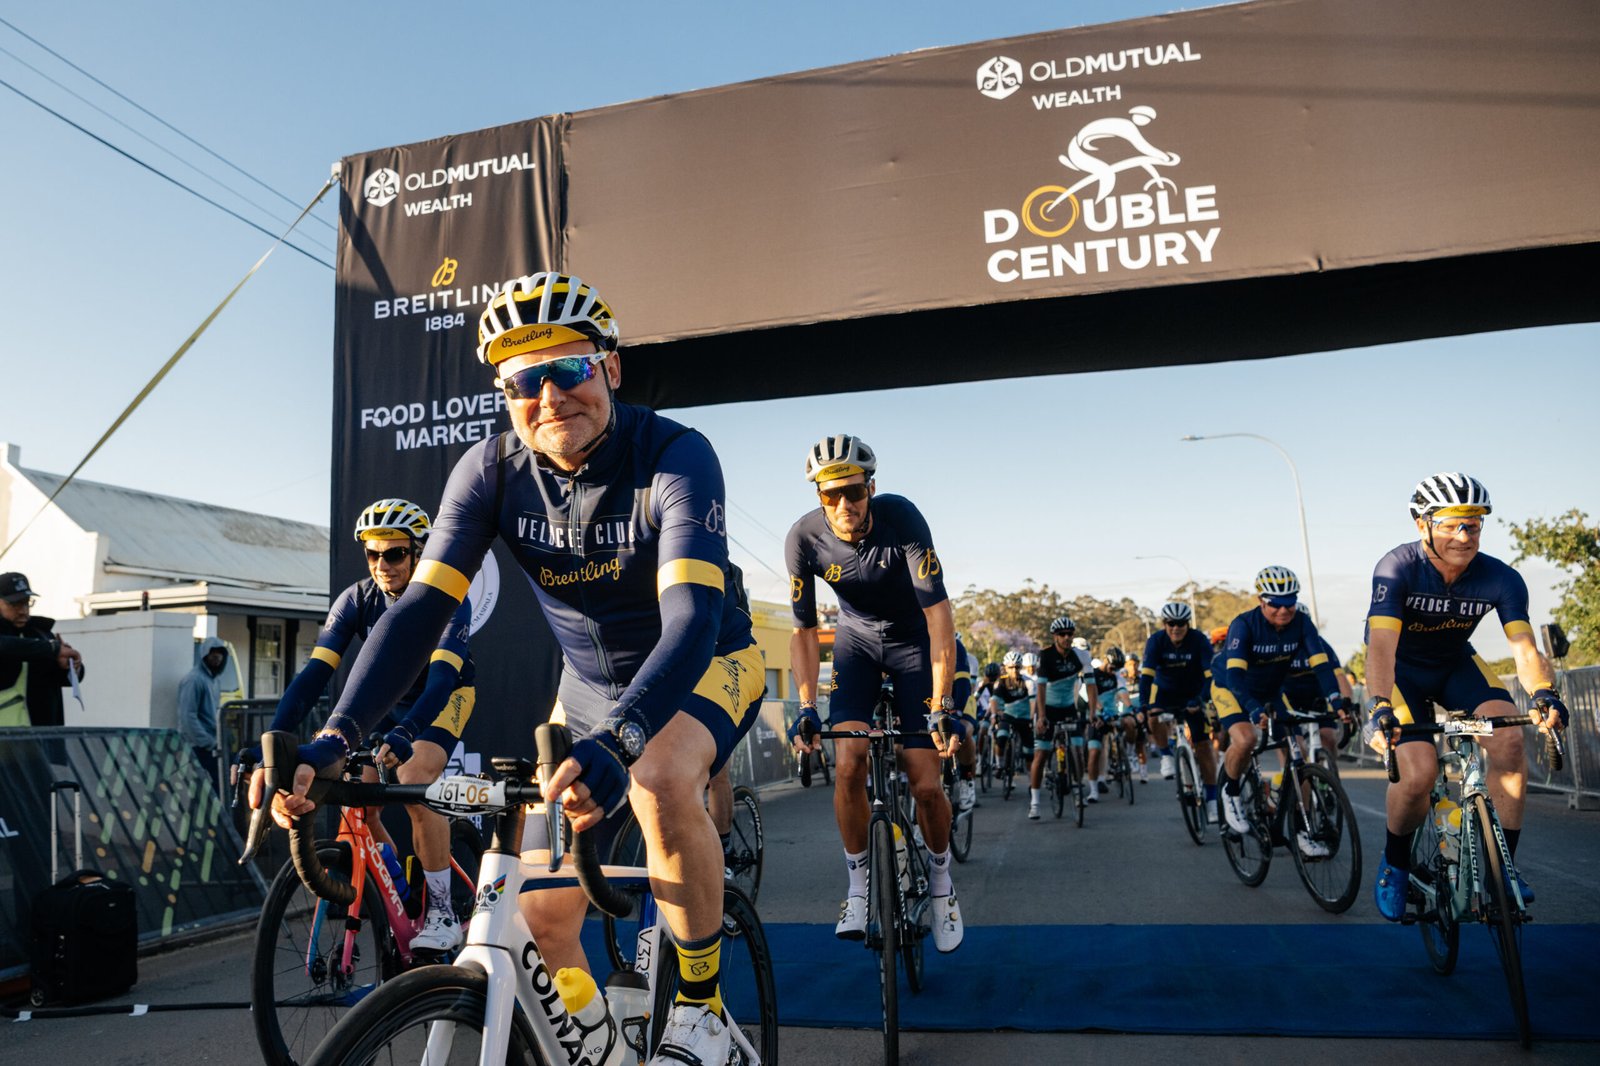 NEW MISSION ACHIEVED: TRIATHLON TEAM BREITLING AND FRIENDS SUPPORT QHUBEKA IN THE OLD MUTUAL WEALTH WEALTH DOUBLE CENTURY BIKE RACE